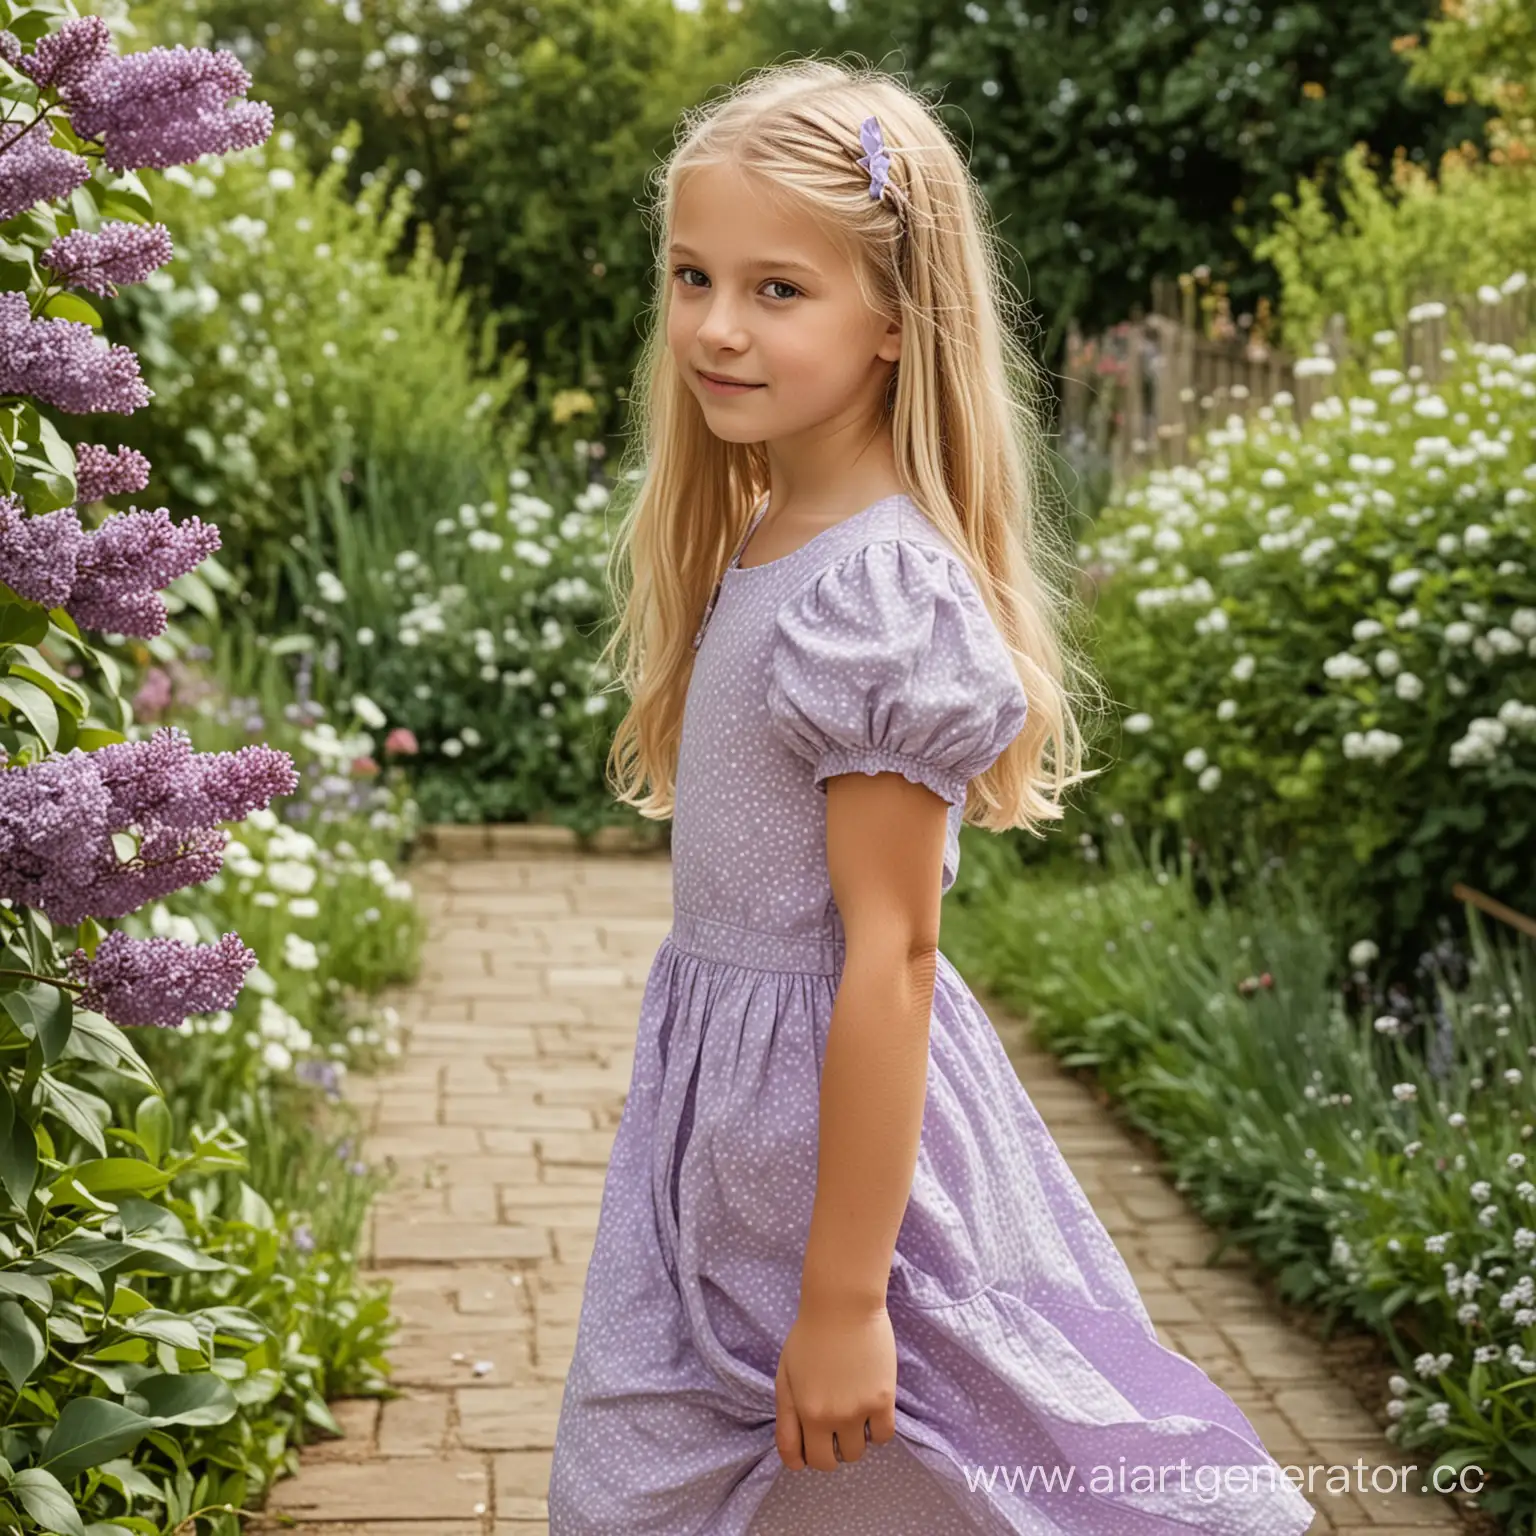 A photo of a 10-year-old girl in a lilac sundress in the garden with her blonde hair down to her waist